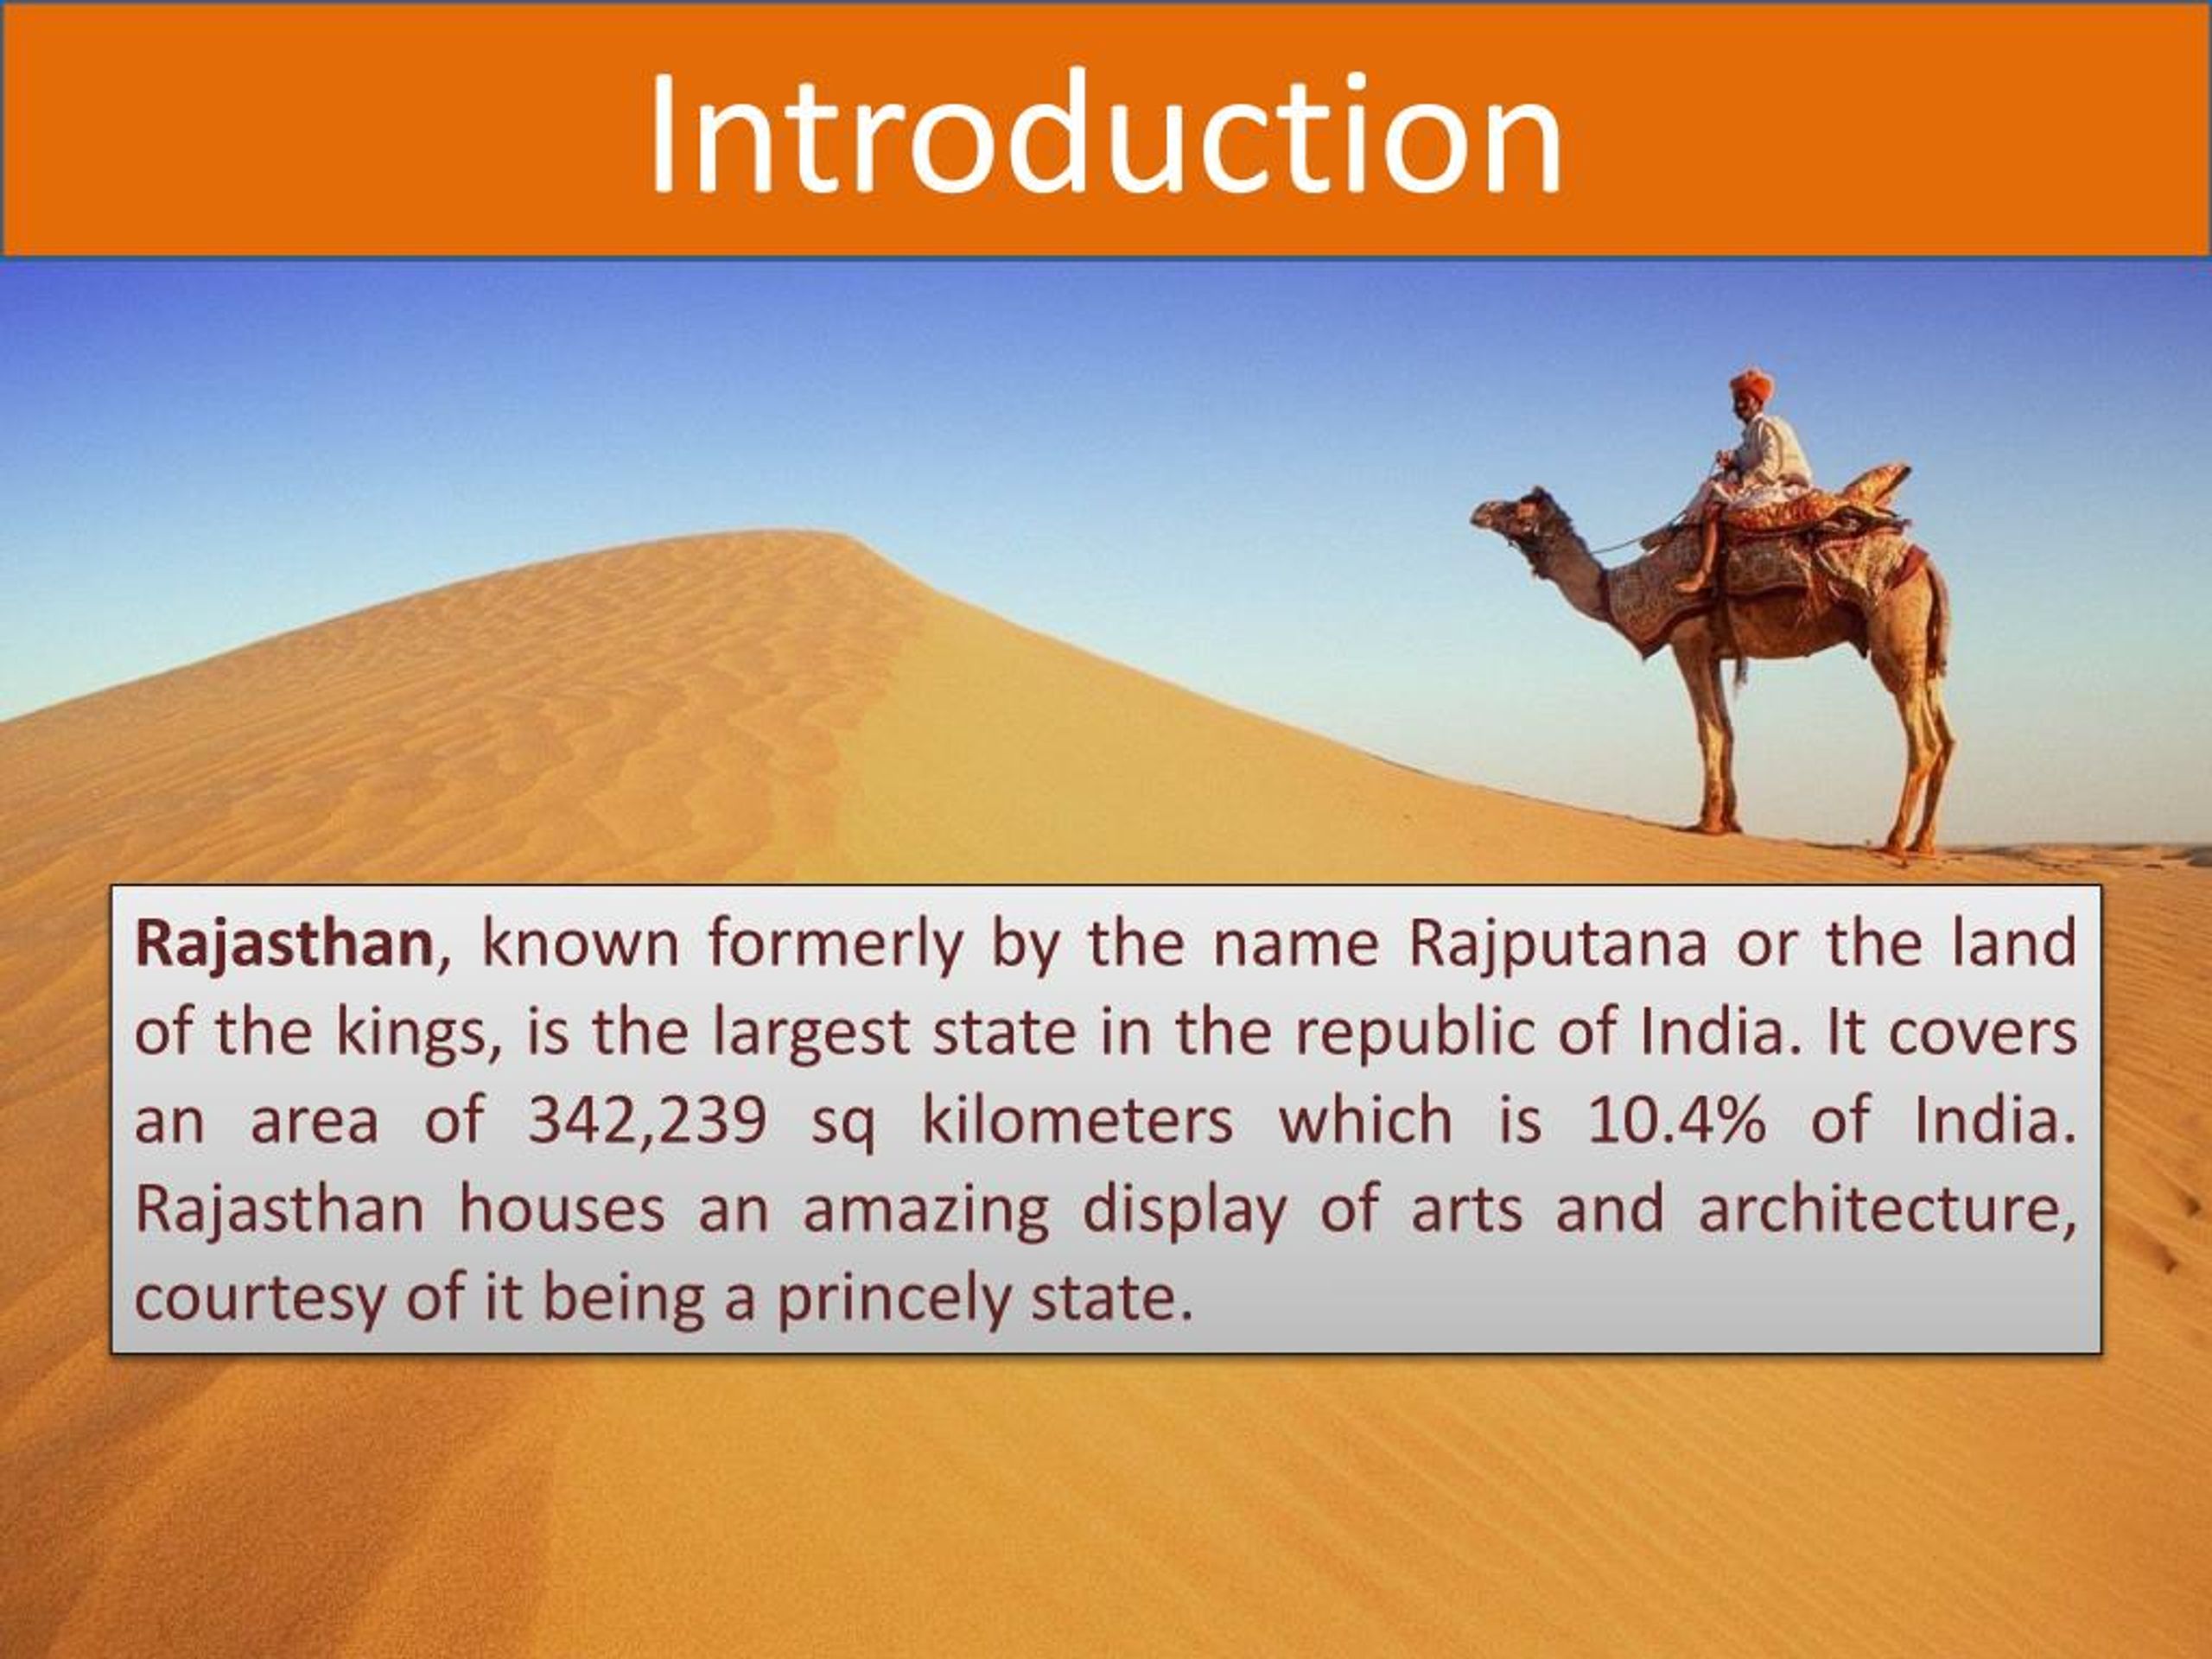 tourism in rajasthan essay